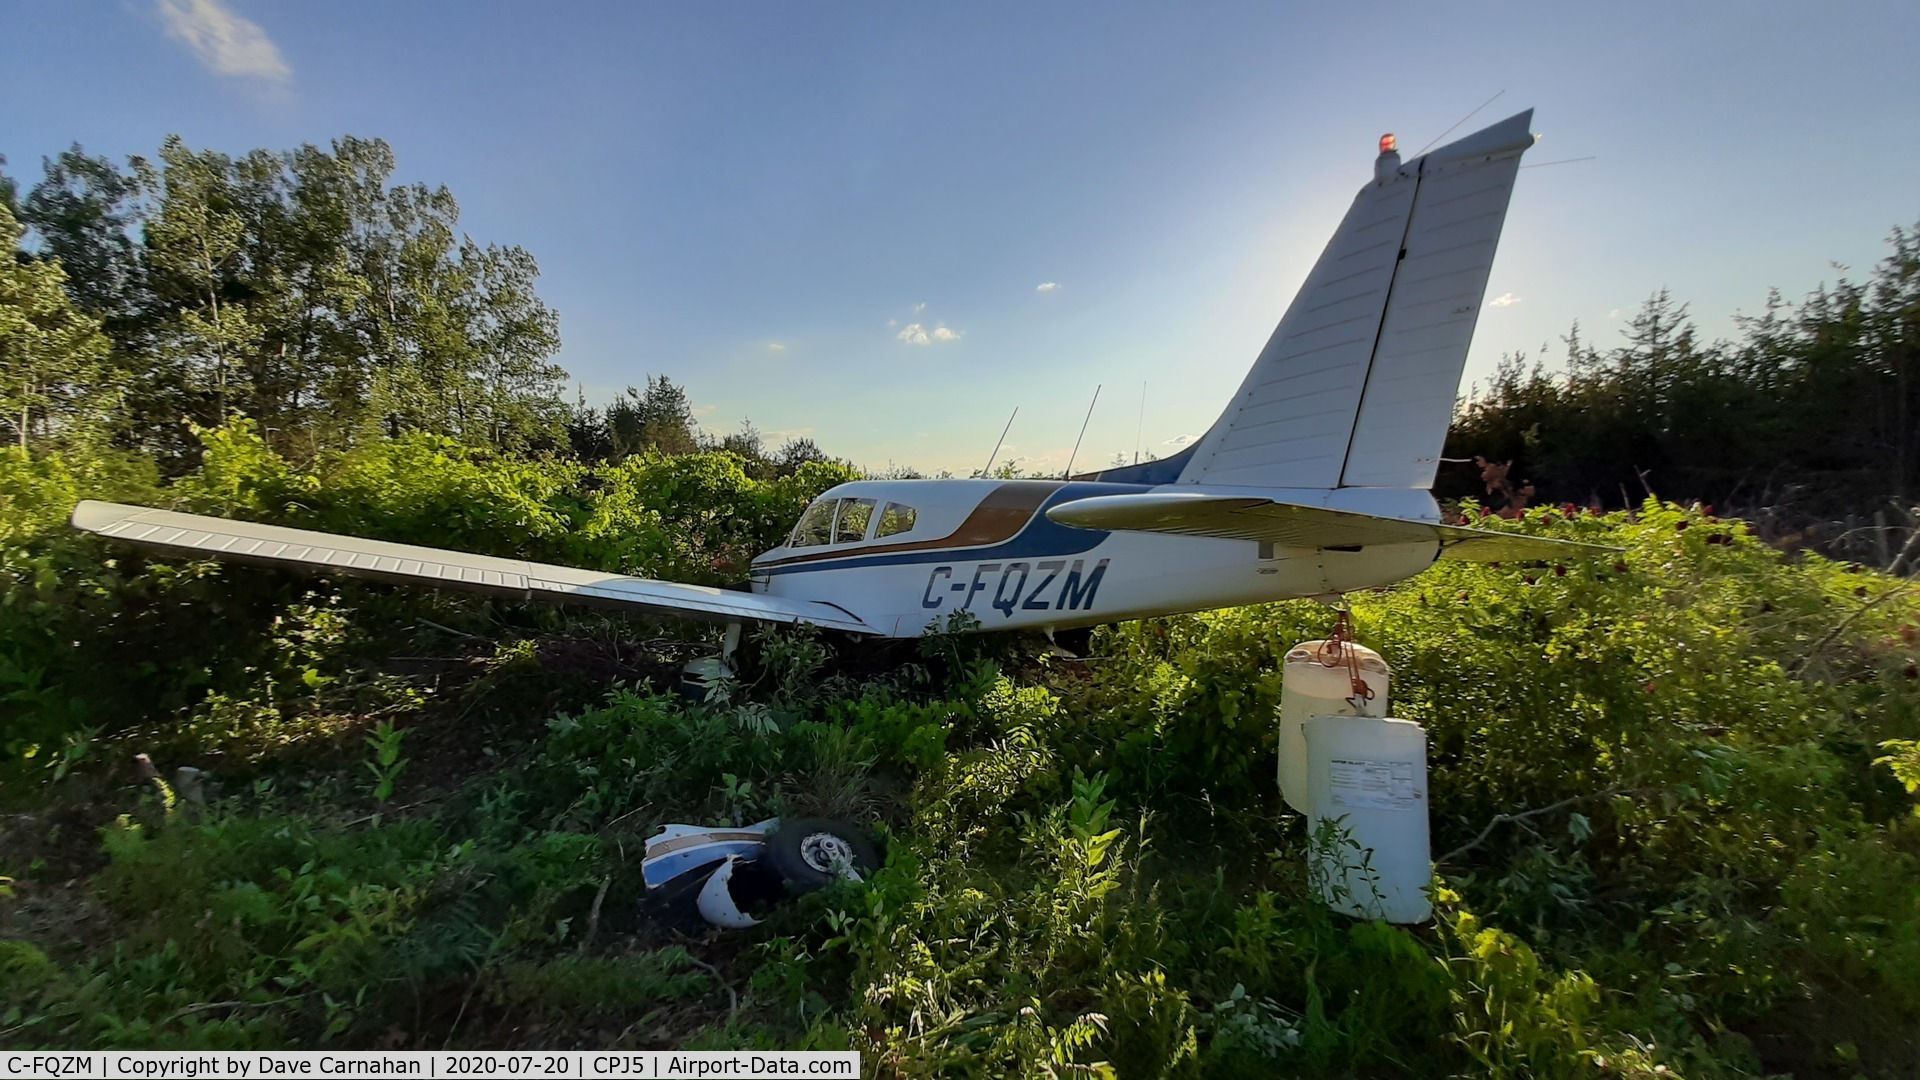 C-FQZM, 1971 Piper PA-28-180 C/N 28-7205022, I was told that the pilot ran out of runway while landing on Rwy 27, Stirling Ontario (CPJ5)